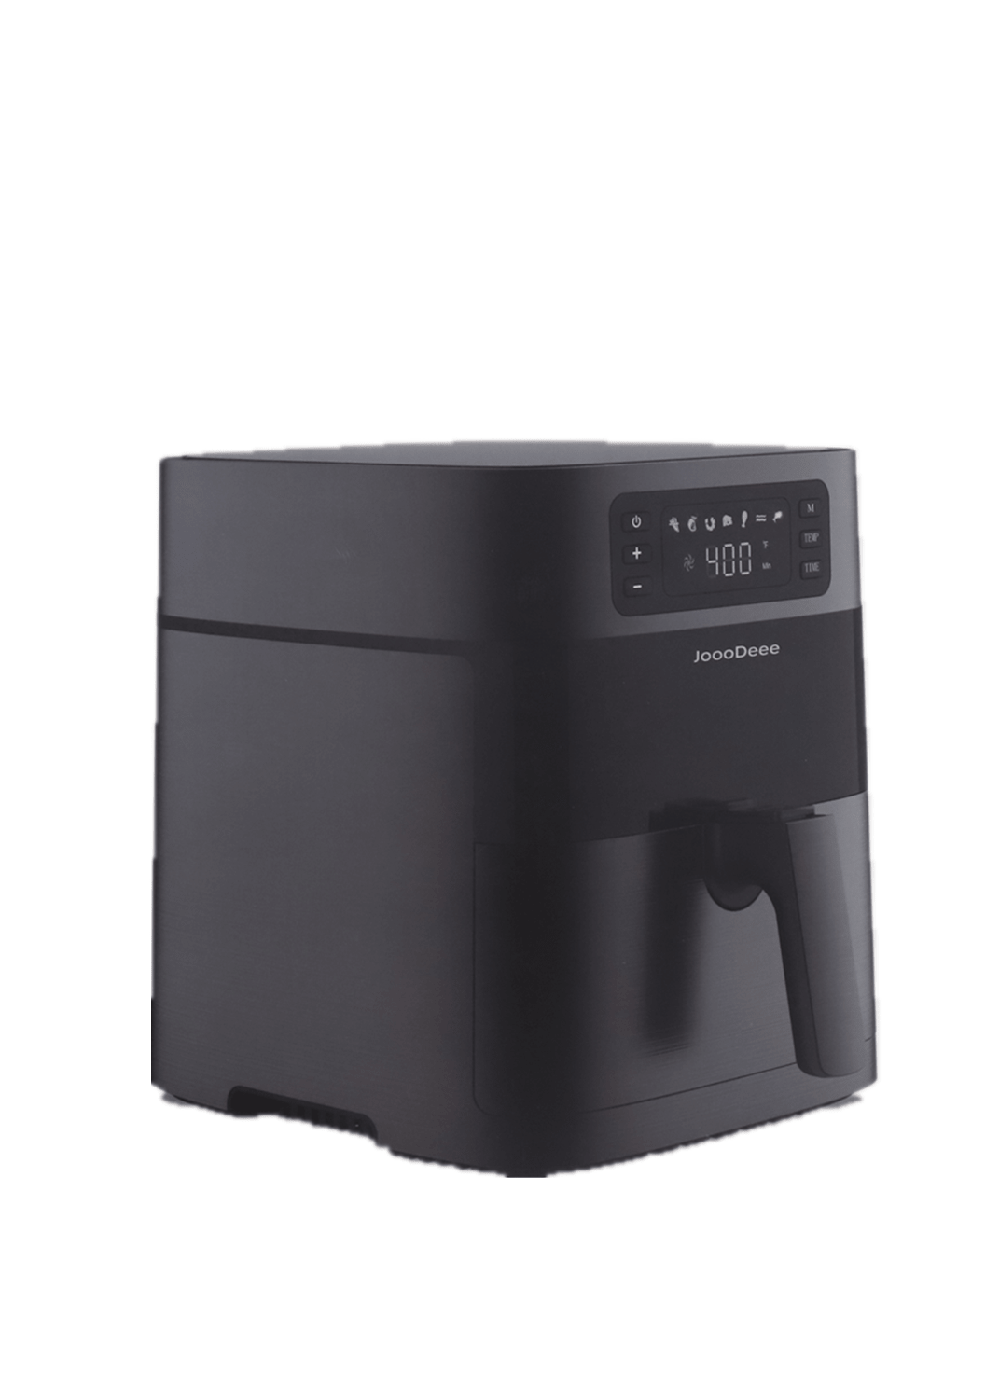 JoooDeee Electric Air Fryer 5.8QT Capacity, with 7 Presets, LED Touch Digital Screen, and Non-stick Square Basket - Black